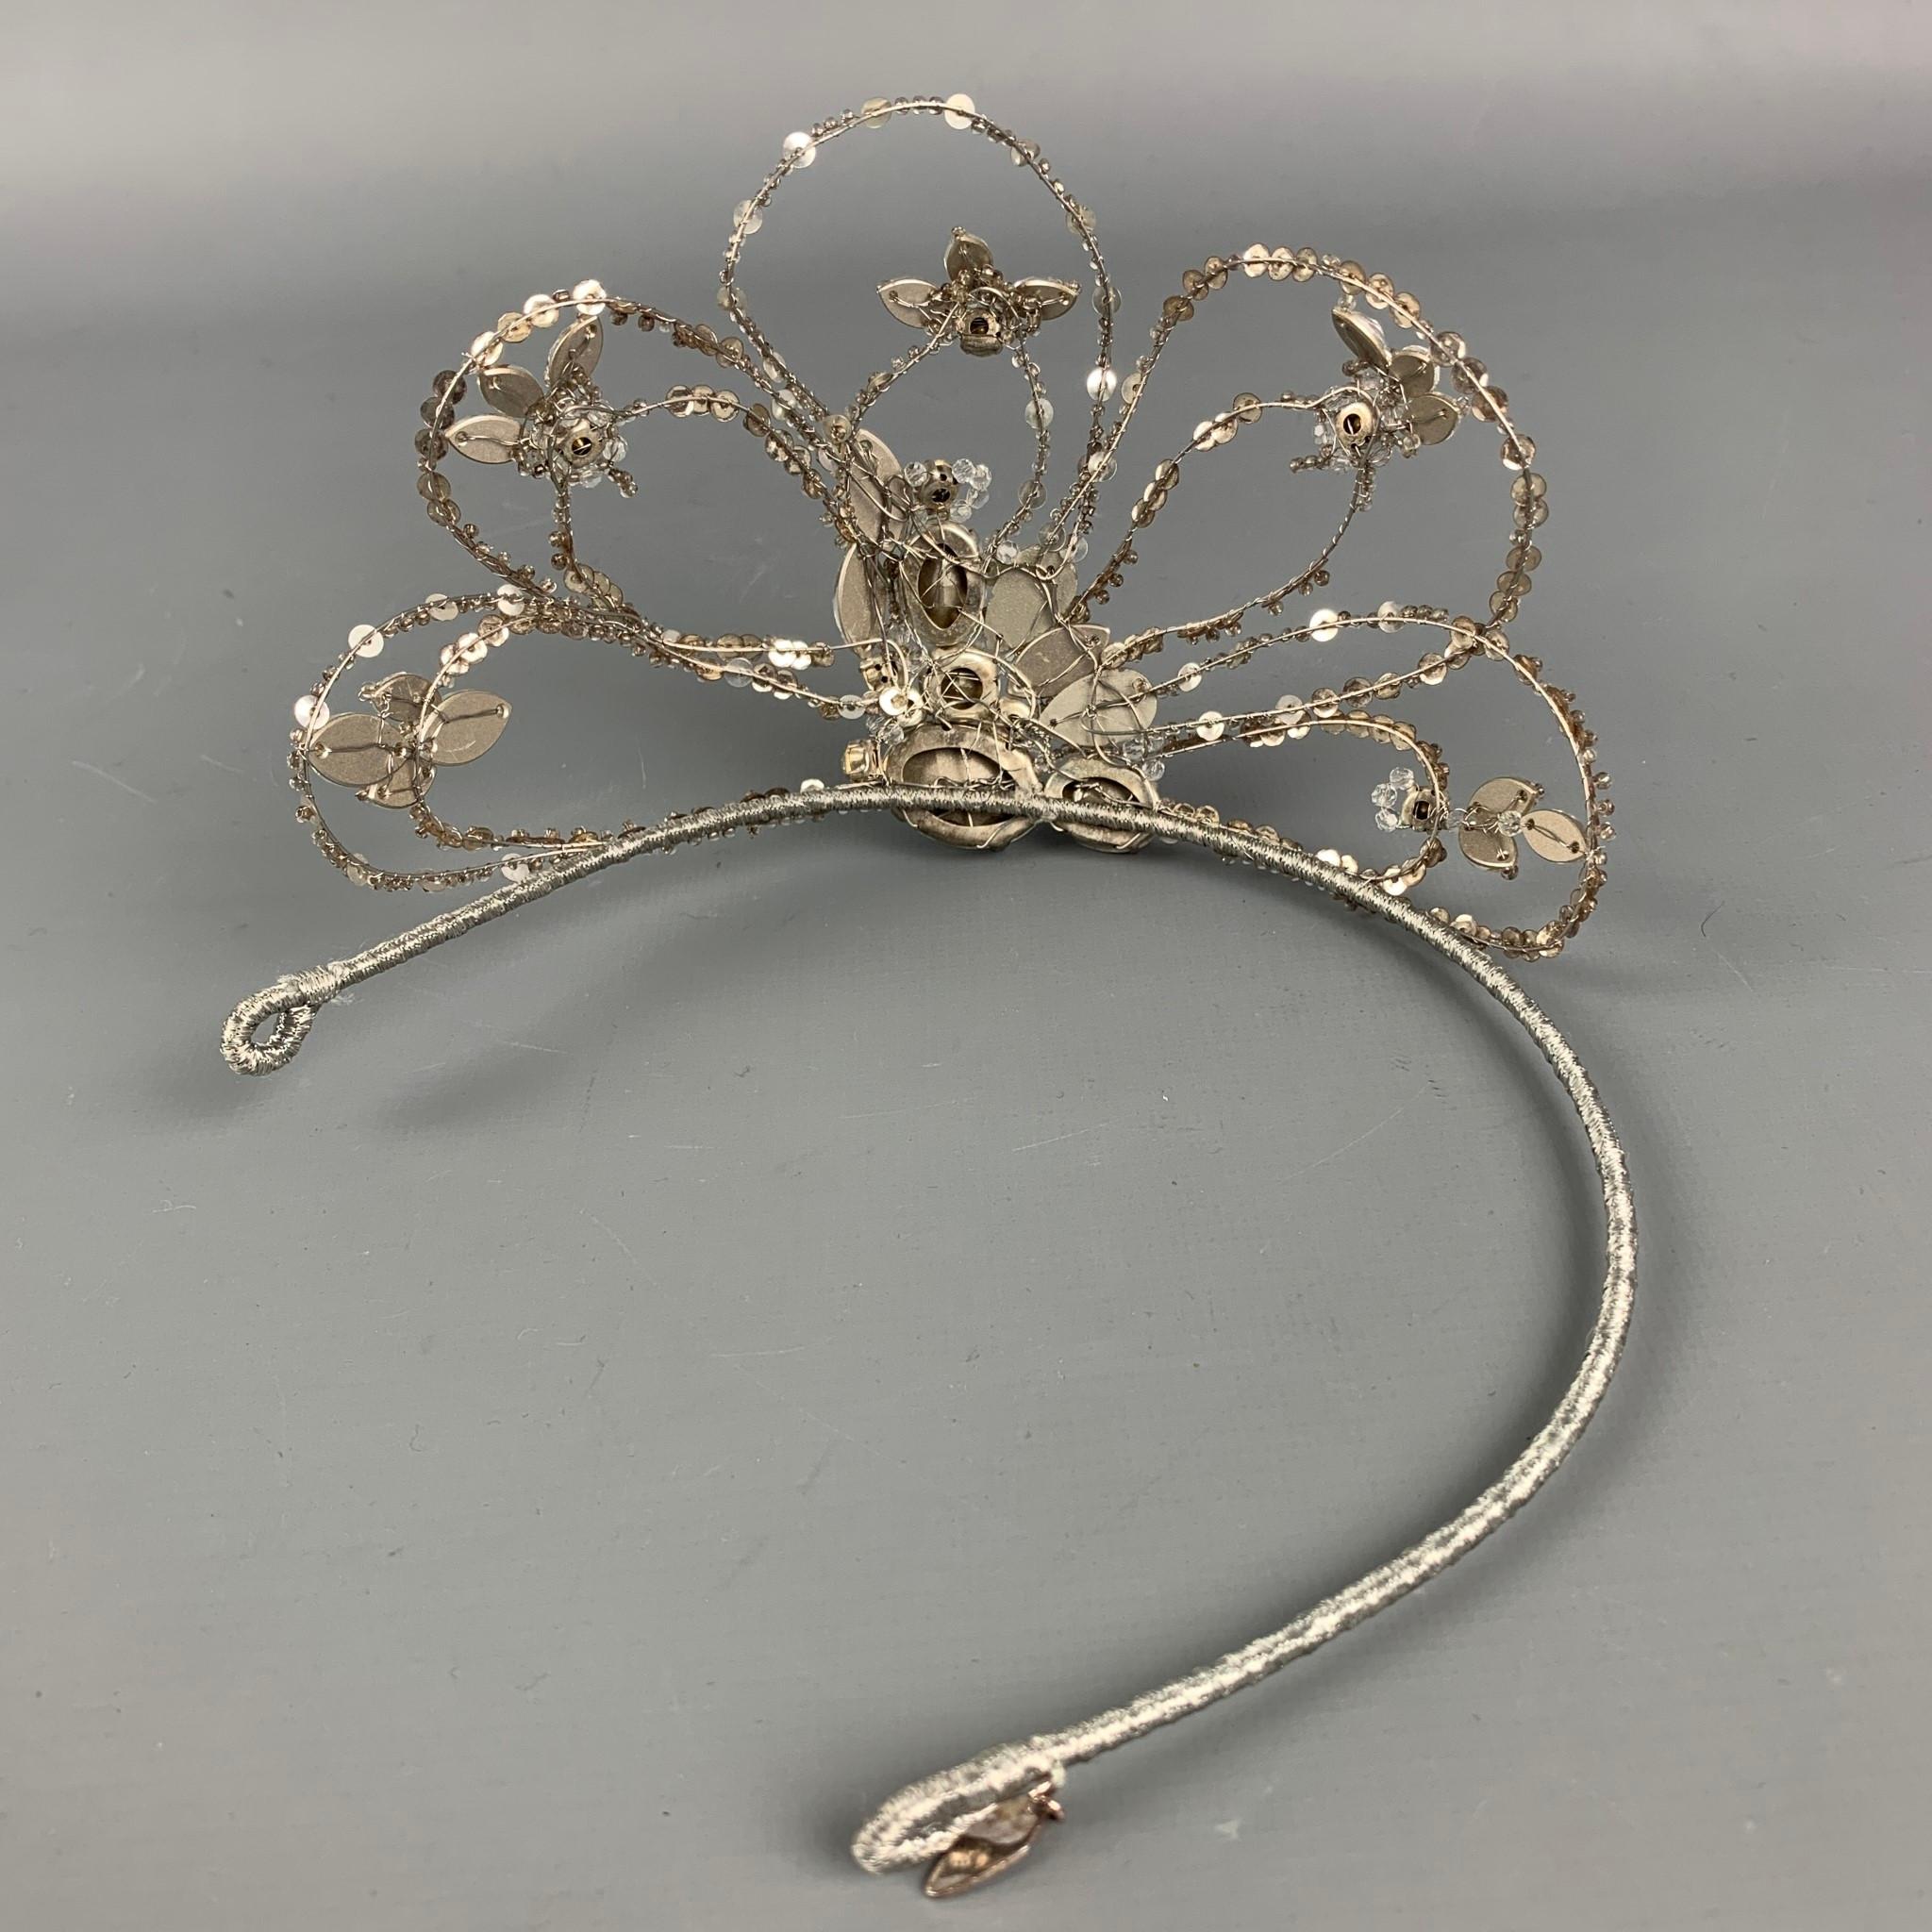 JENNY PACKHAM tiara comes in a silver sequined material with rhinestone details. 

New With Box. 
Marked: OS
Original Retail Price: $495.00

Measurements:

Fits: 6 in.
